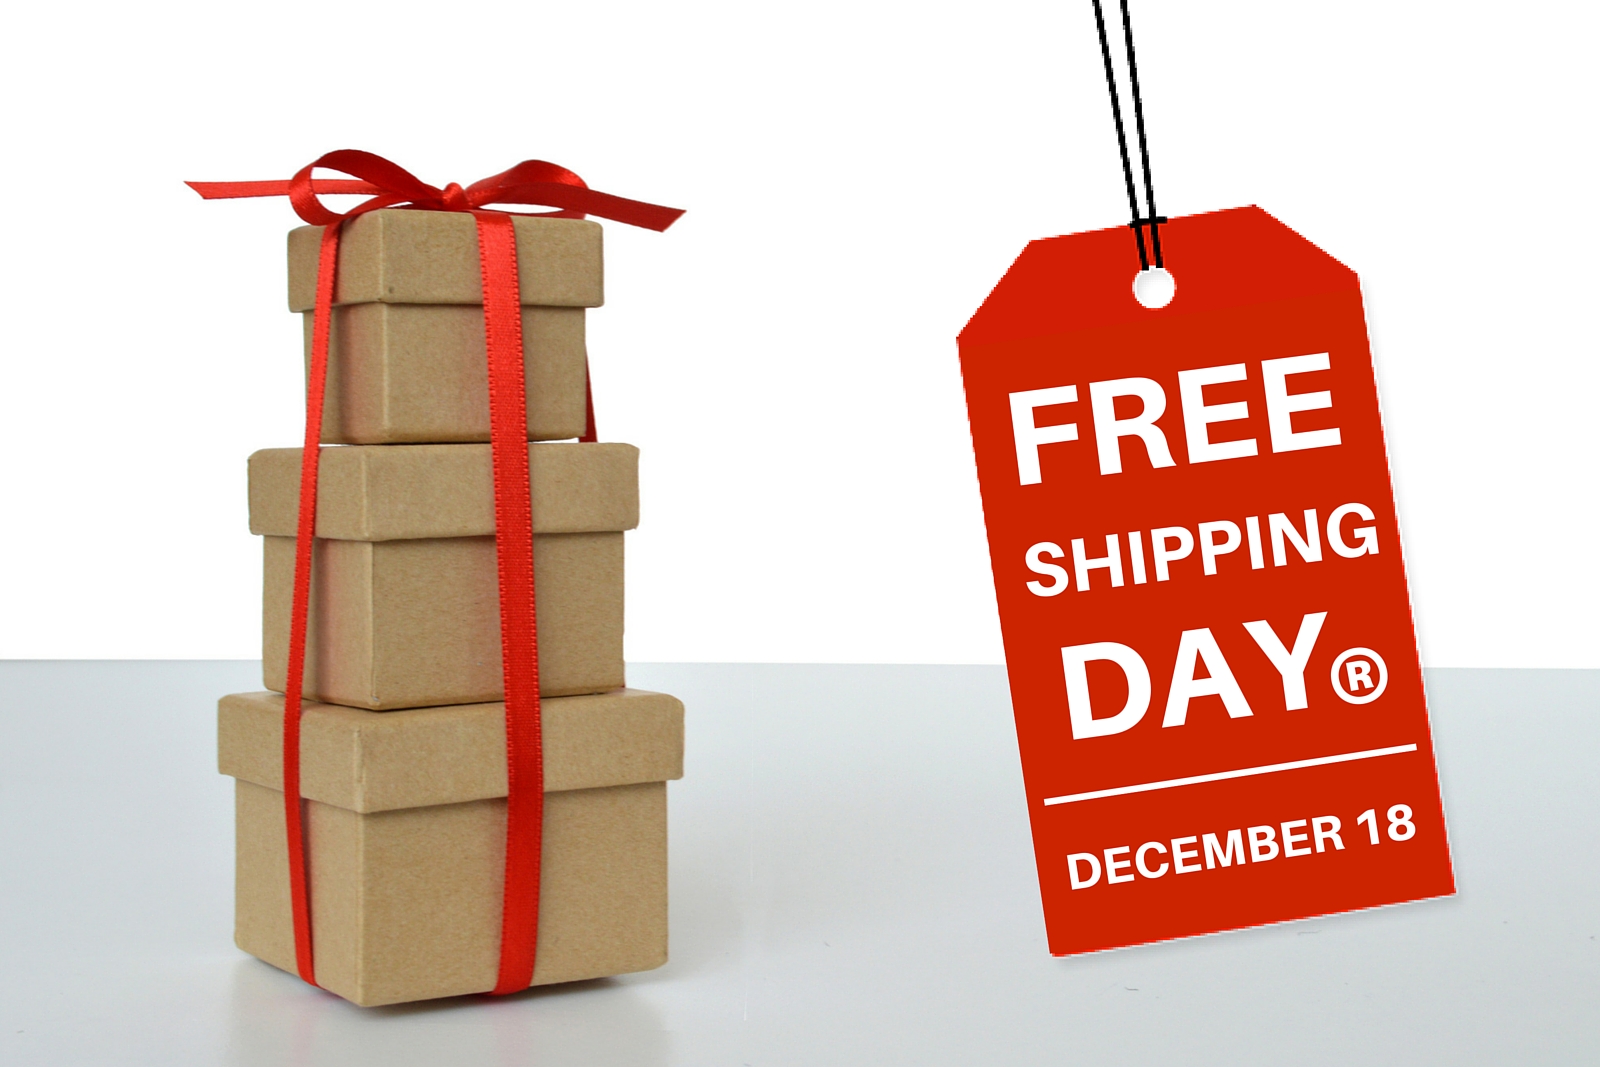 How To Prepare Your Small Online Business For Free Shipping Day